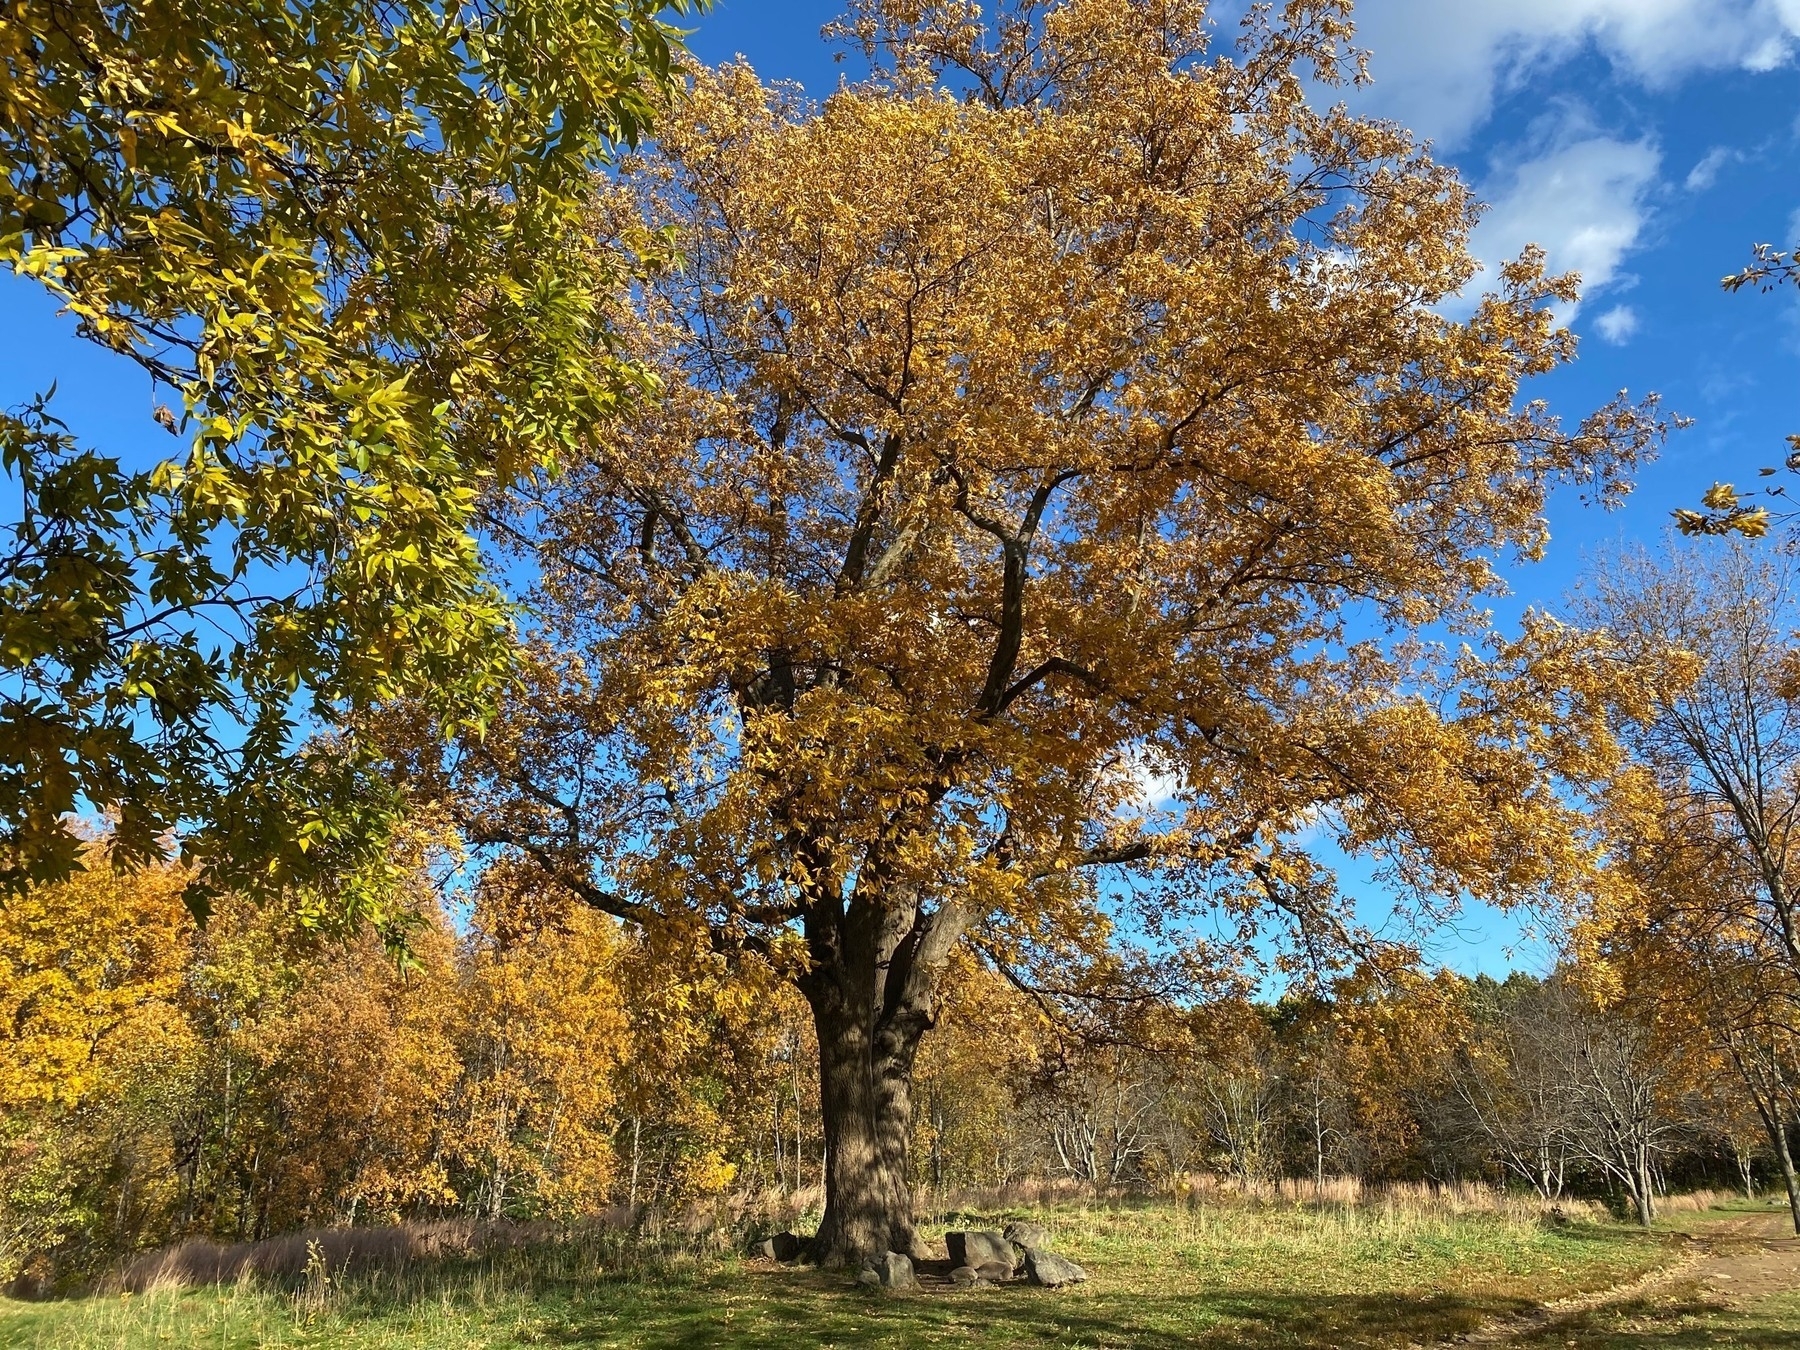 Large tree at the edge of a field with yellow fall foliage.